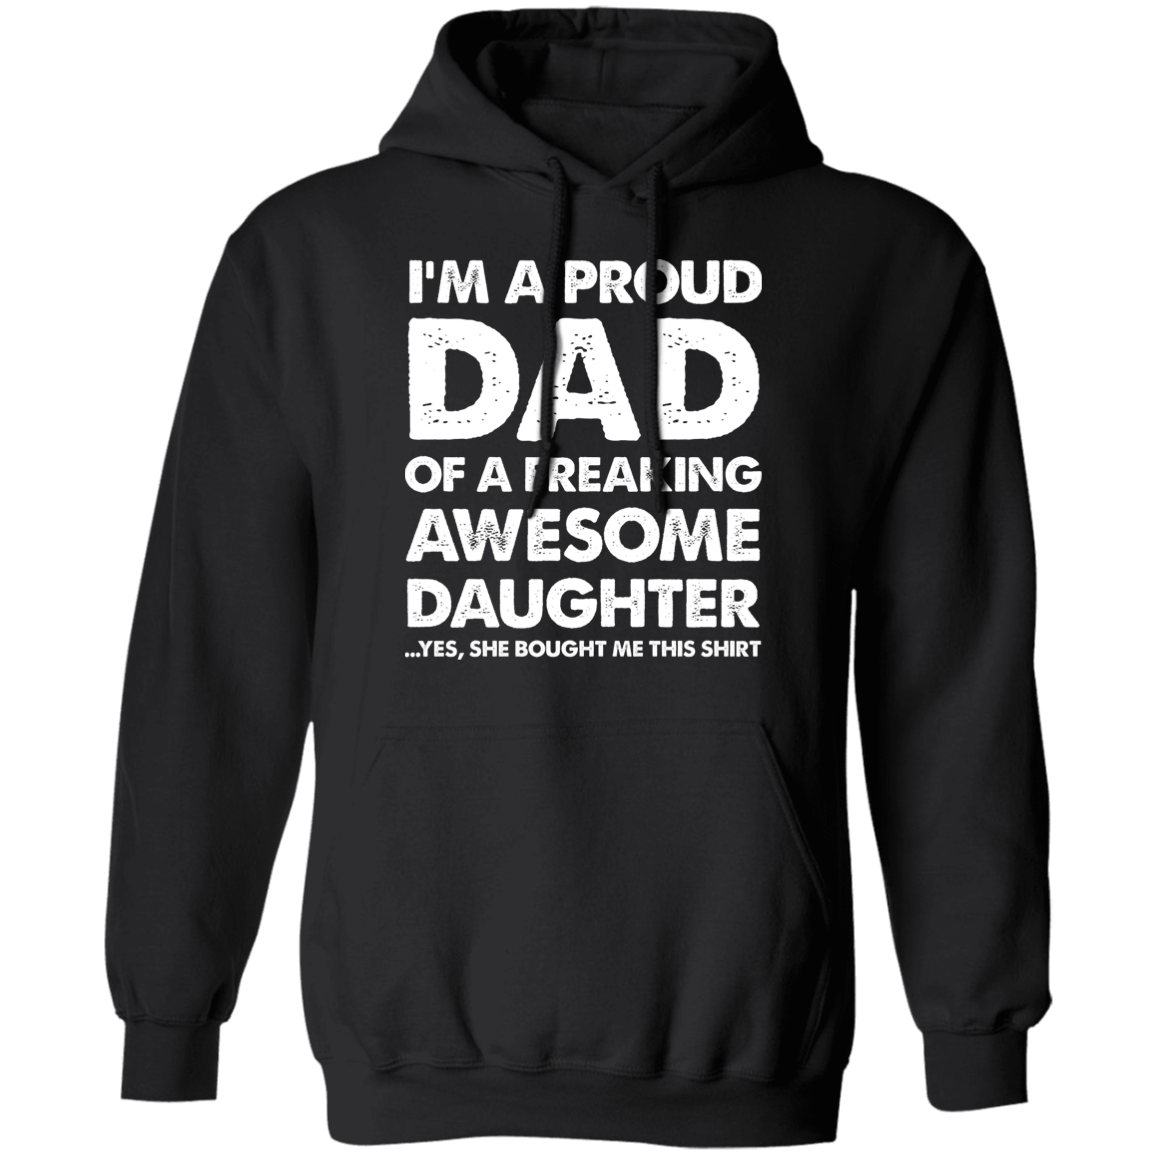 I'm A Proud Dad Of A Freaking Awesome Daughter Apparel